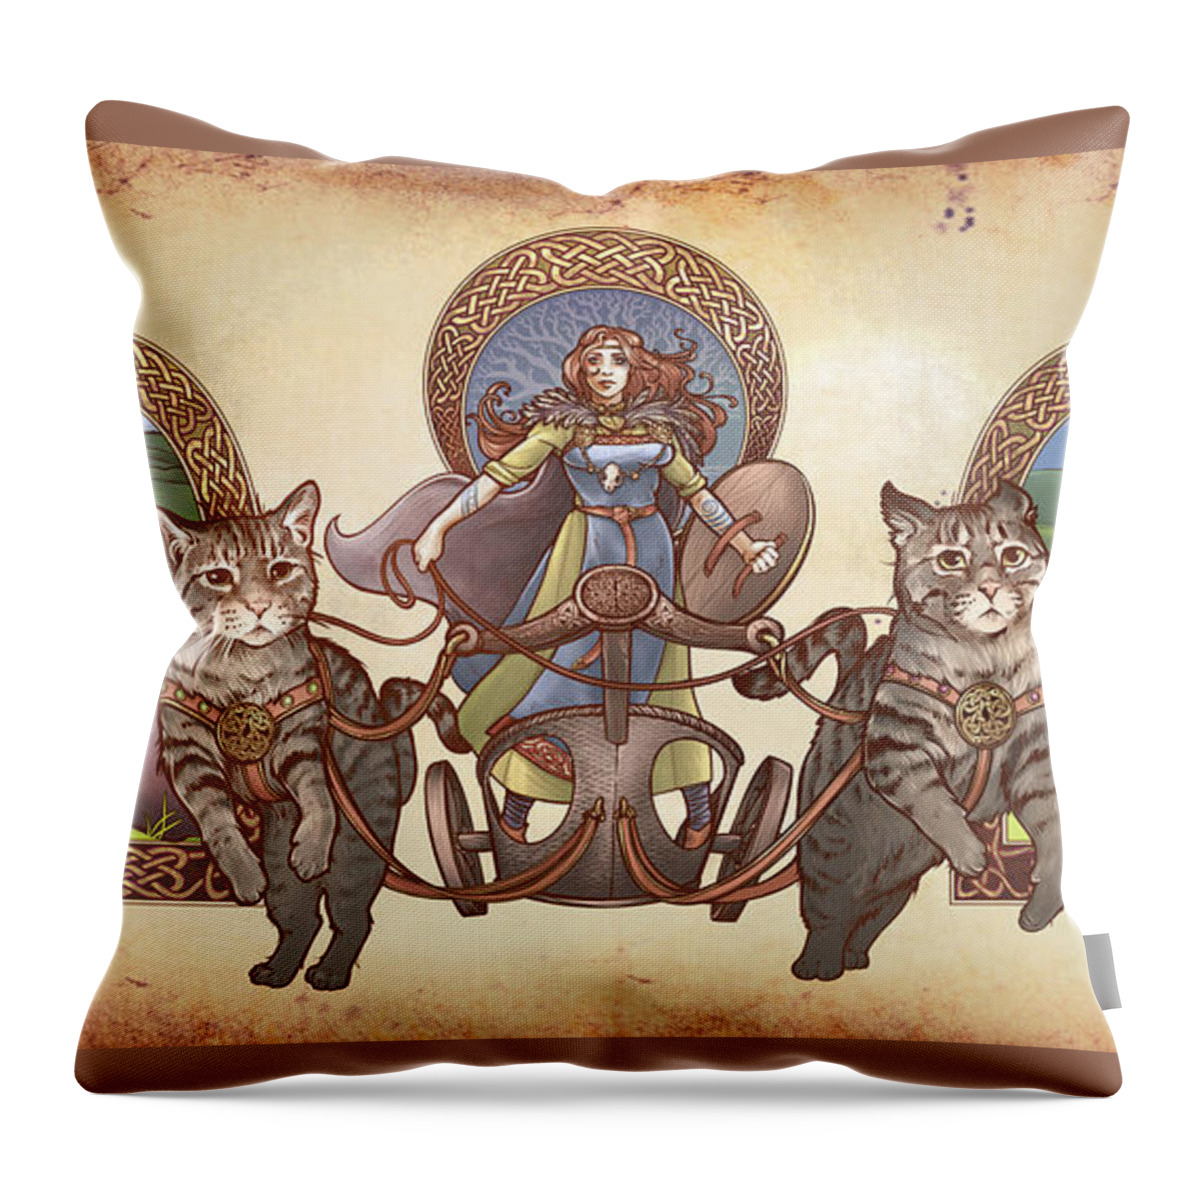 Freya Throw Pillow featuring the digital art Freya Driving Her Cat Chariot - Triptic Garbed version by Danielle Zemba